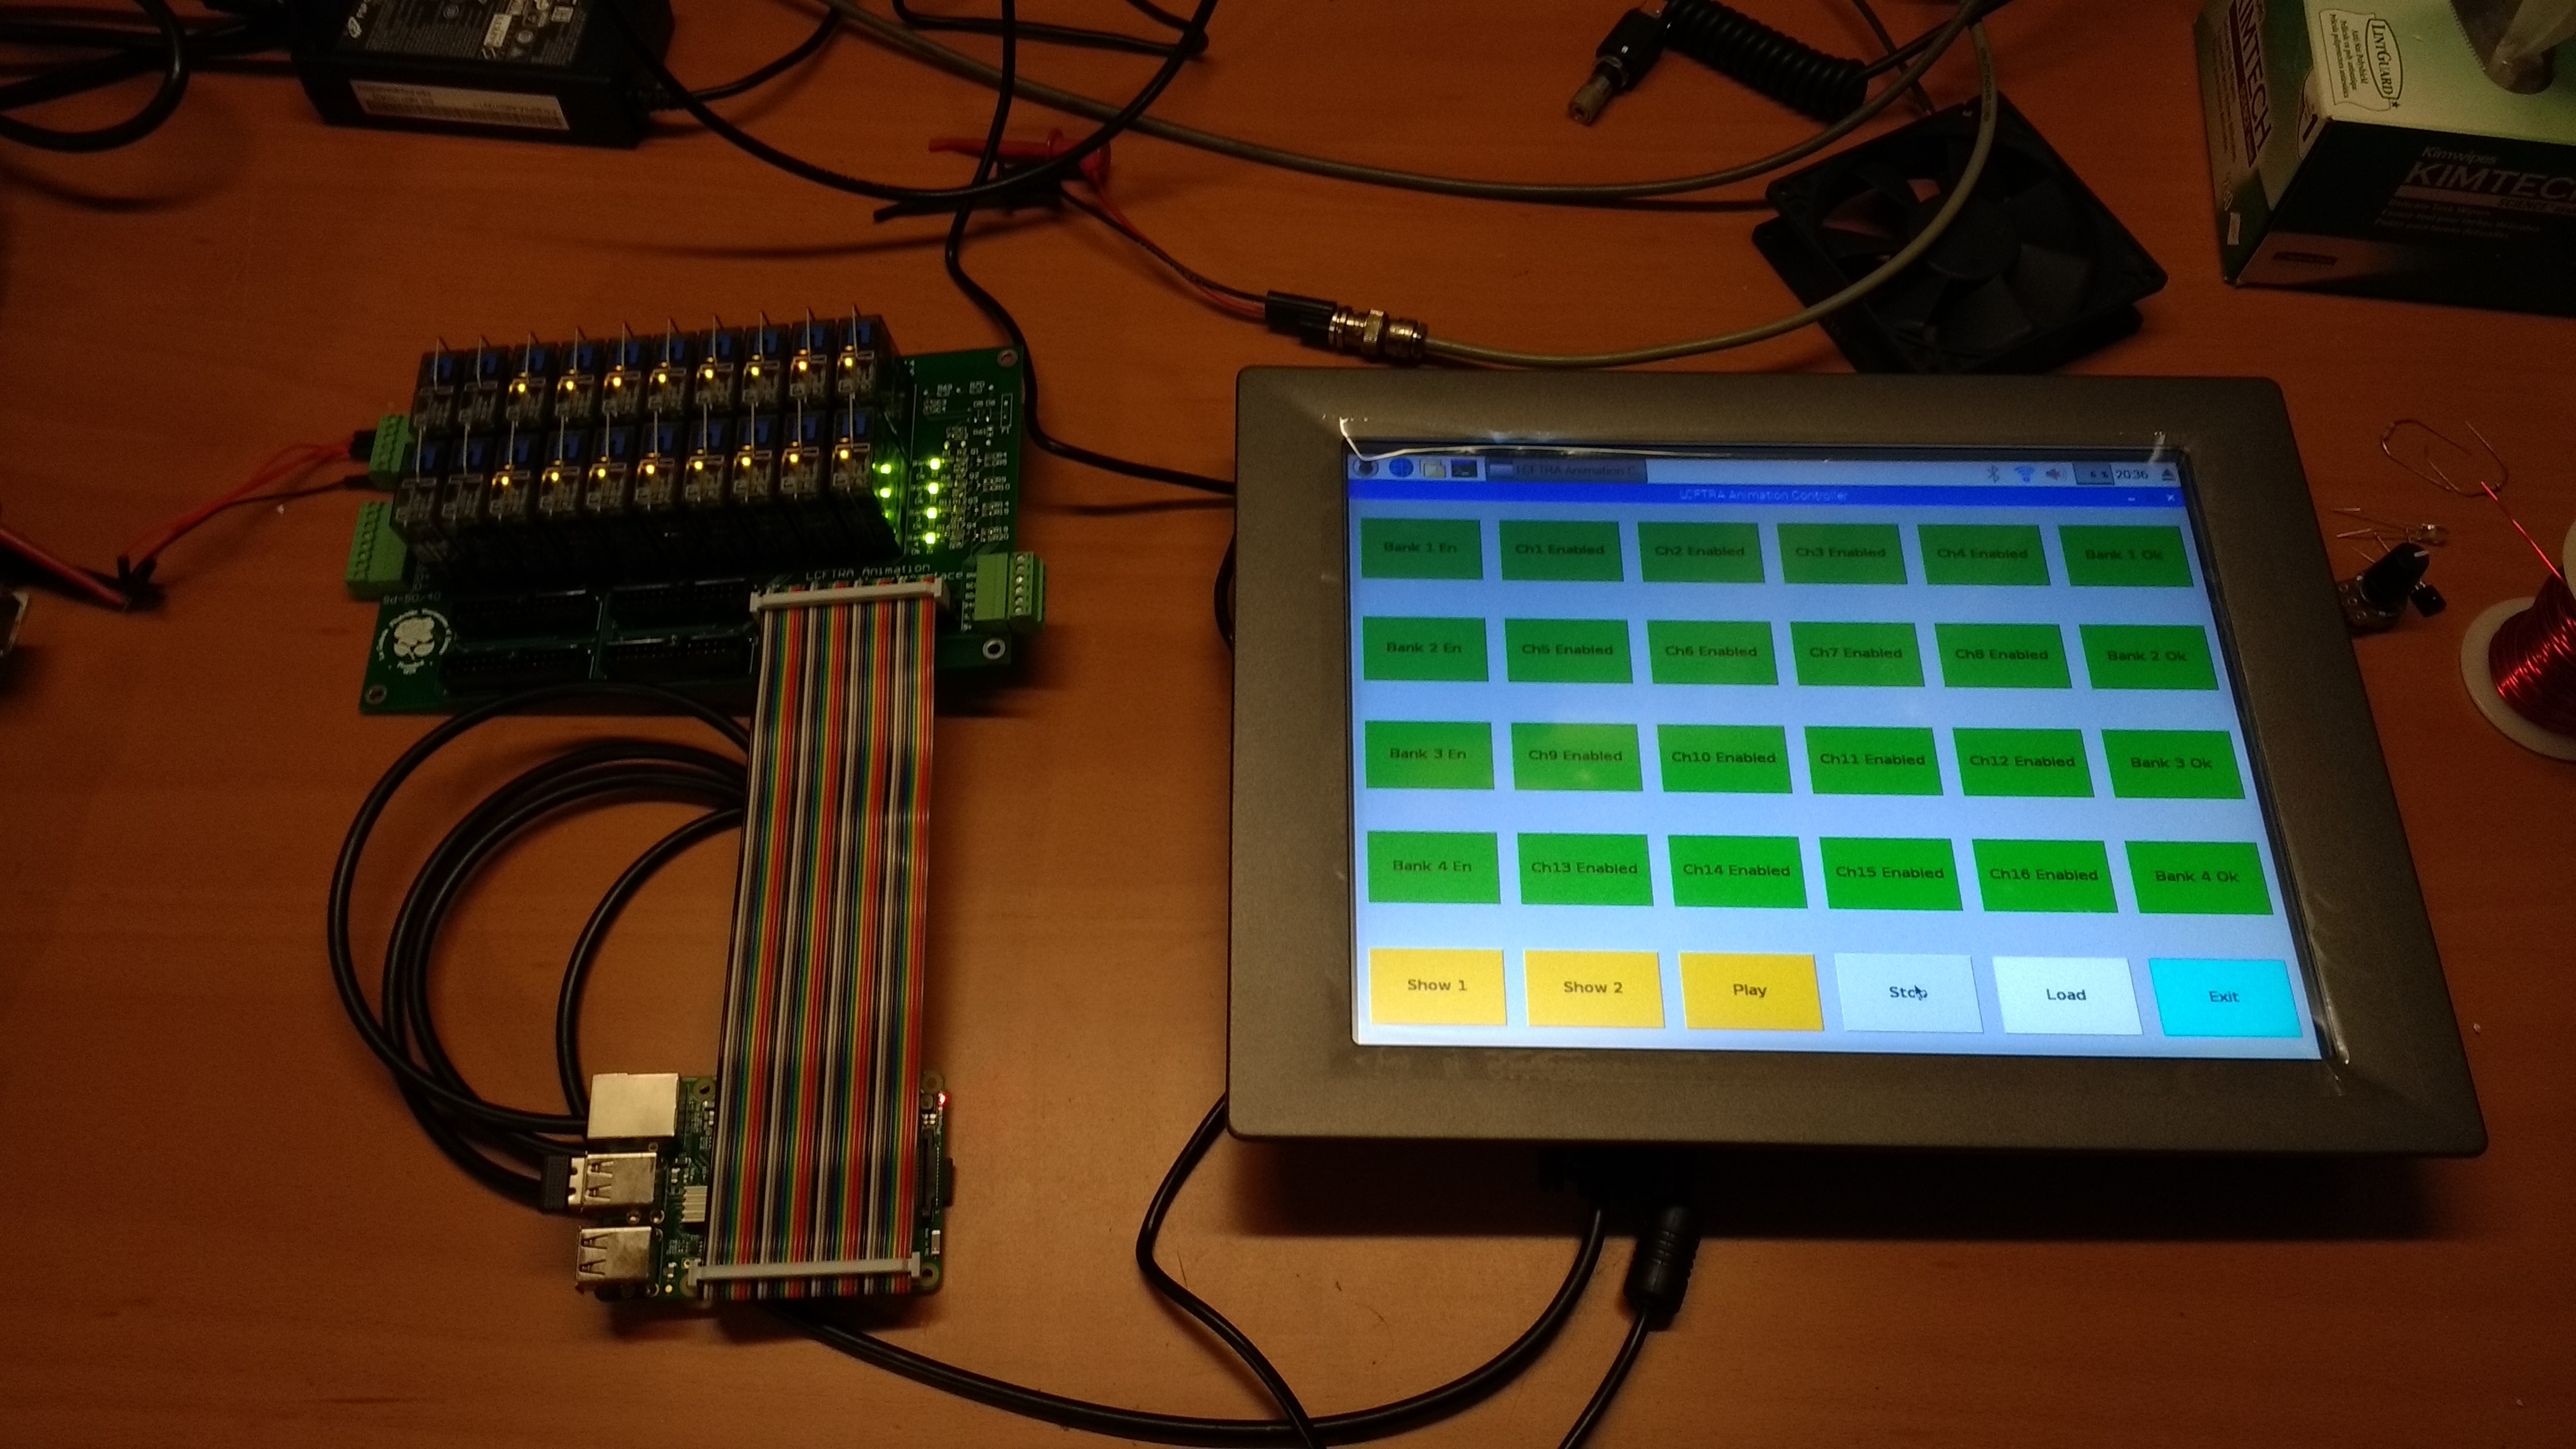 The touchscreen sitting on a lab bench next to the controller interface PCBA and raspberry pi